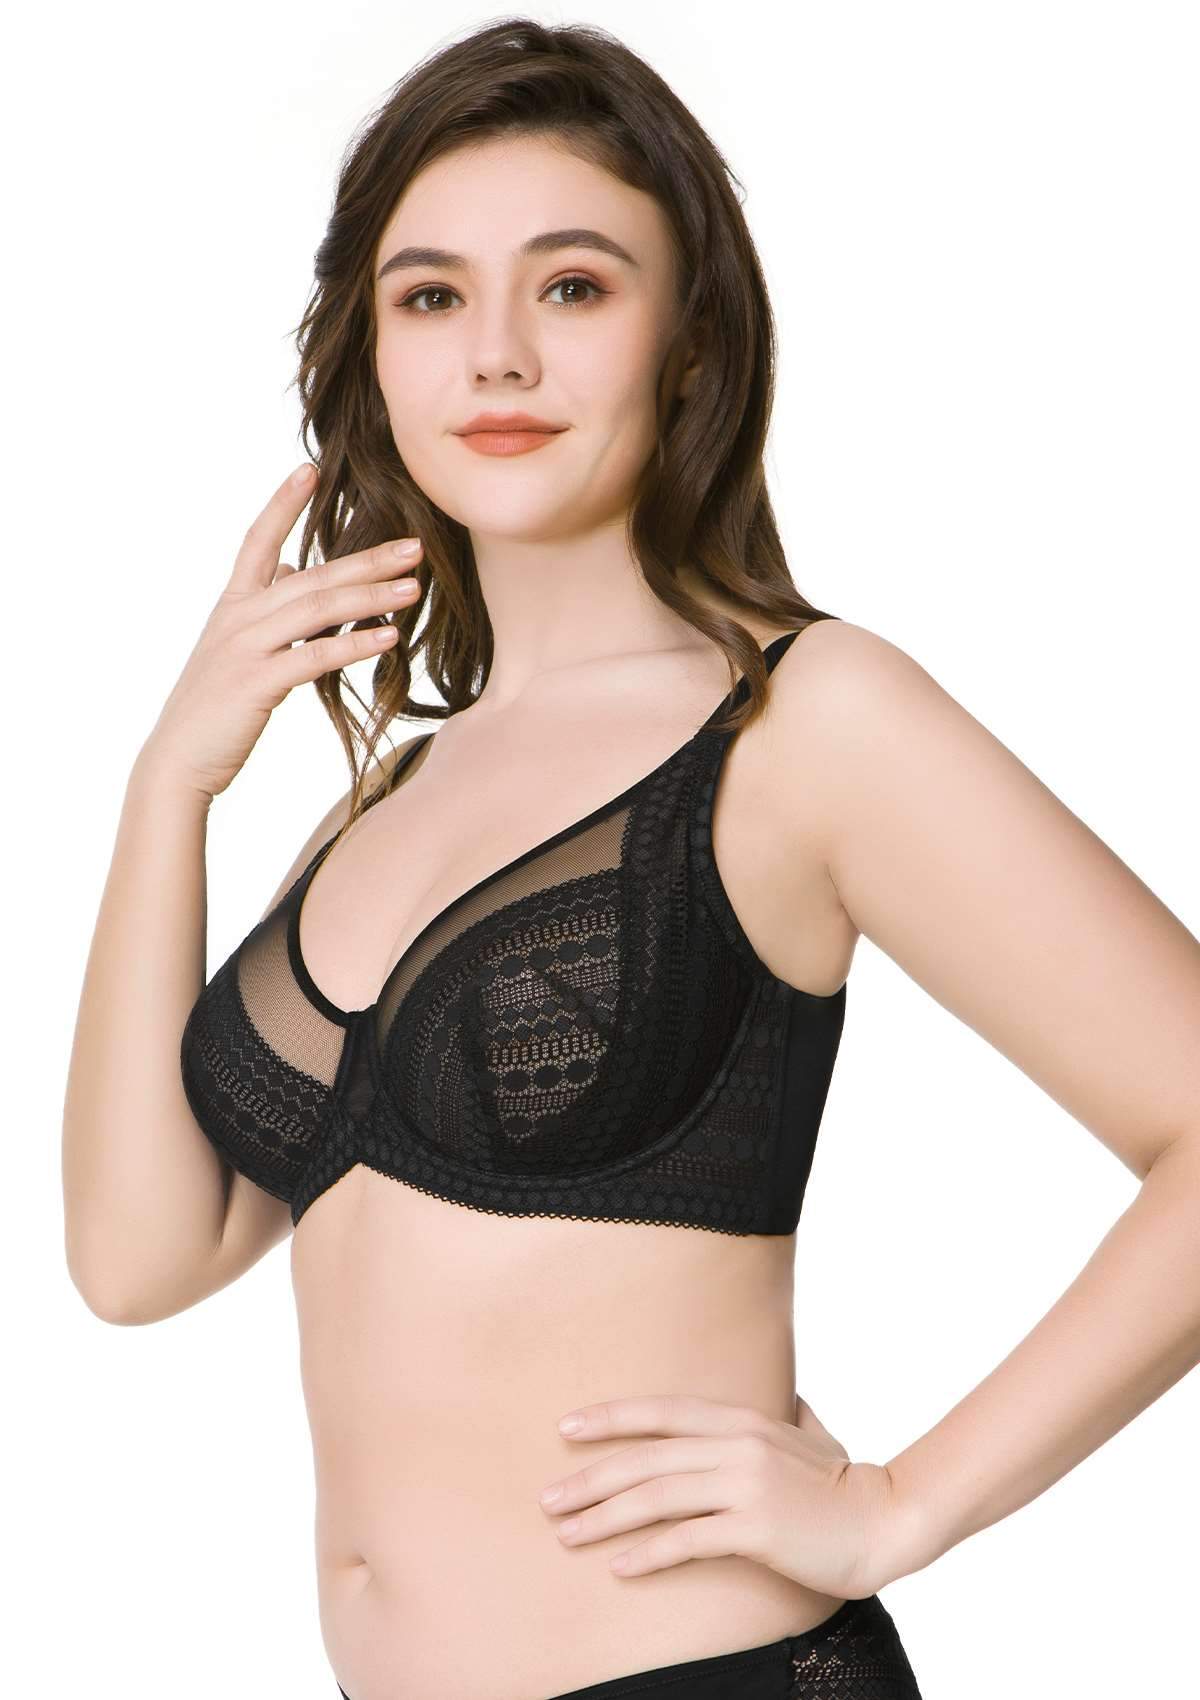 HSIA Heroine Matching Bra And Panties: Unlined Lace Unpadded Bra - Black / 36 / D